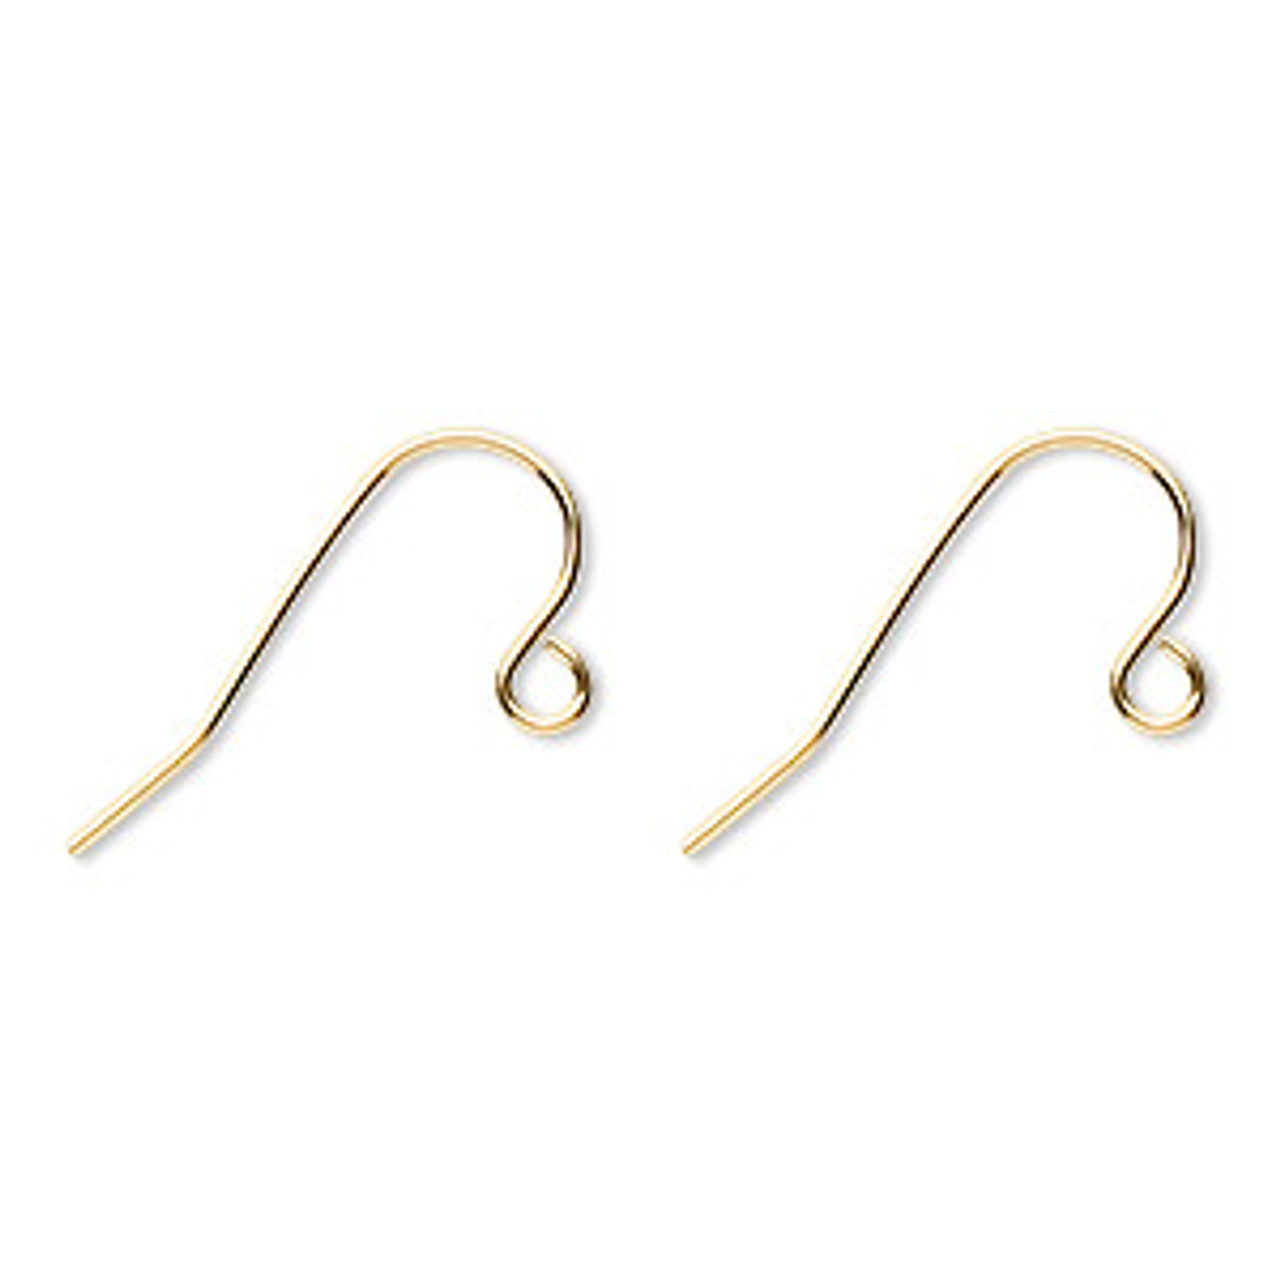 11mm Fish Hook with Open Loop 21ga (50 Pair) Gold Plated Steel